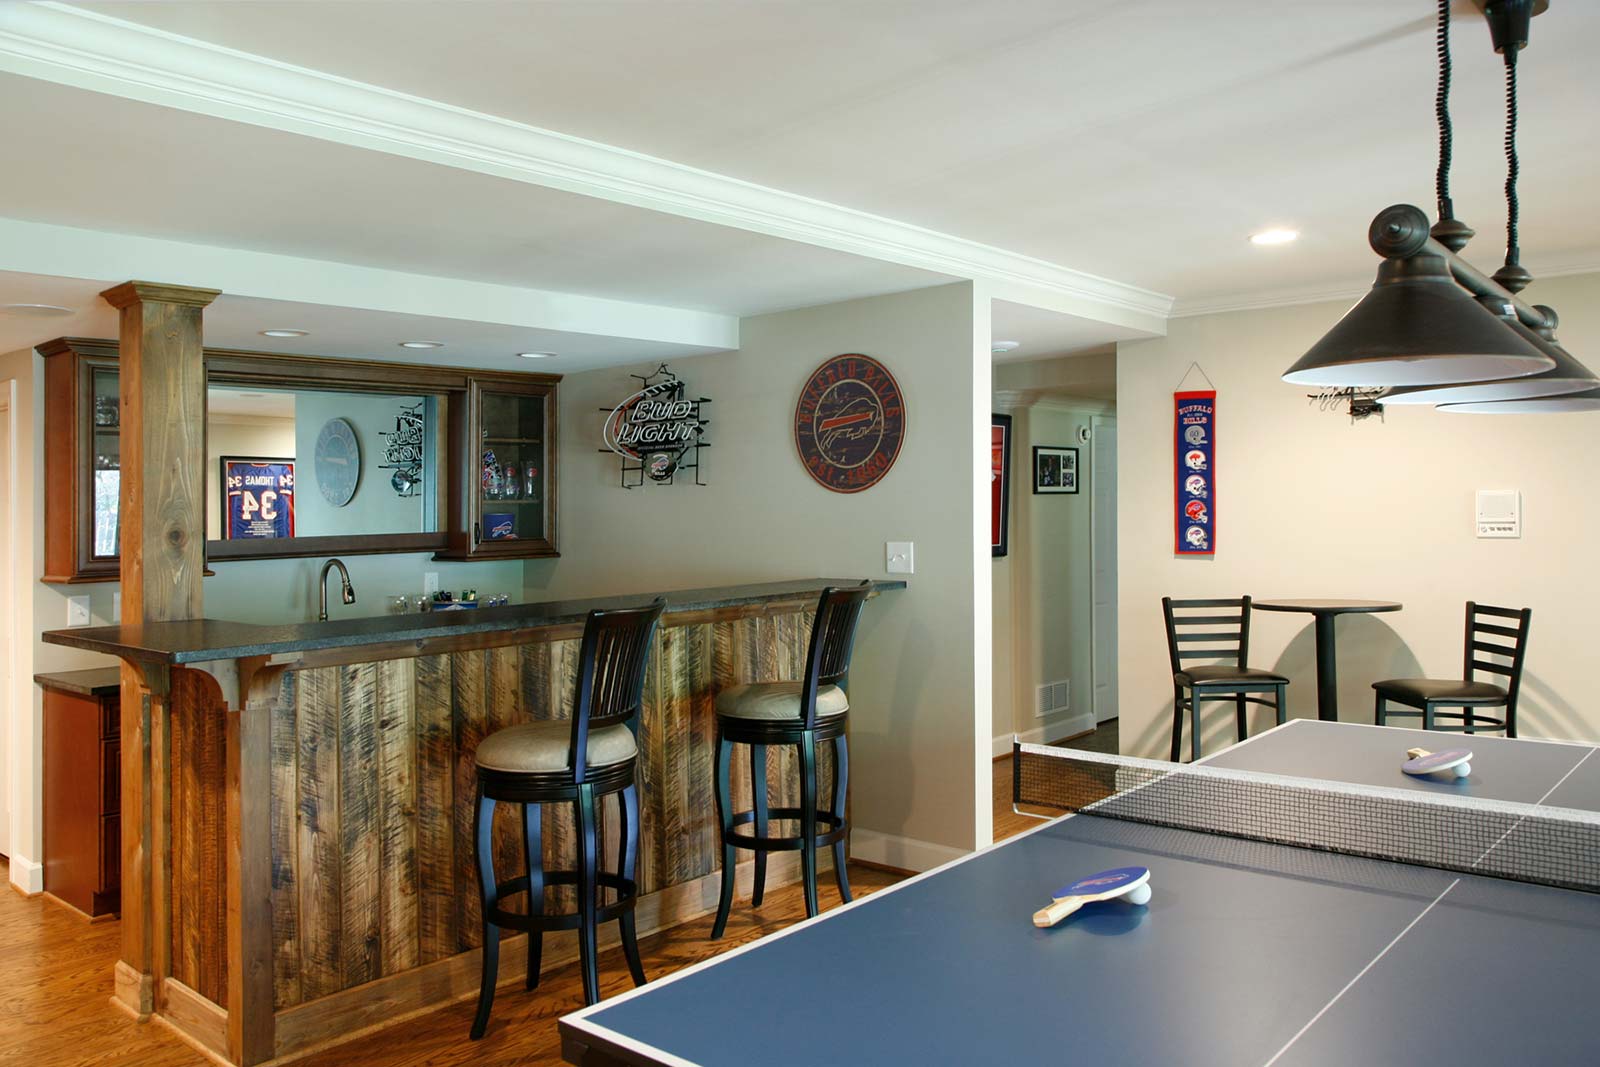 Second view of basement bar with rustic wood front